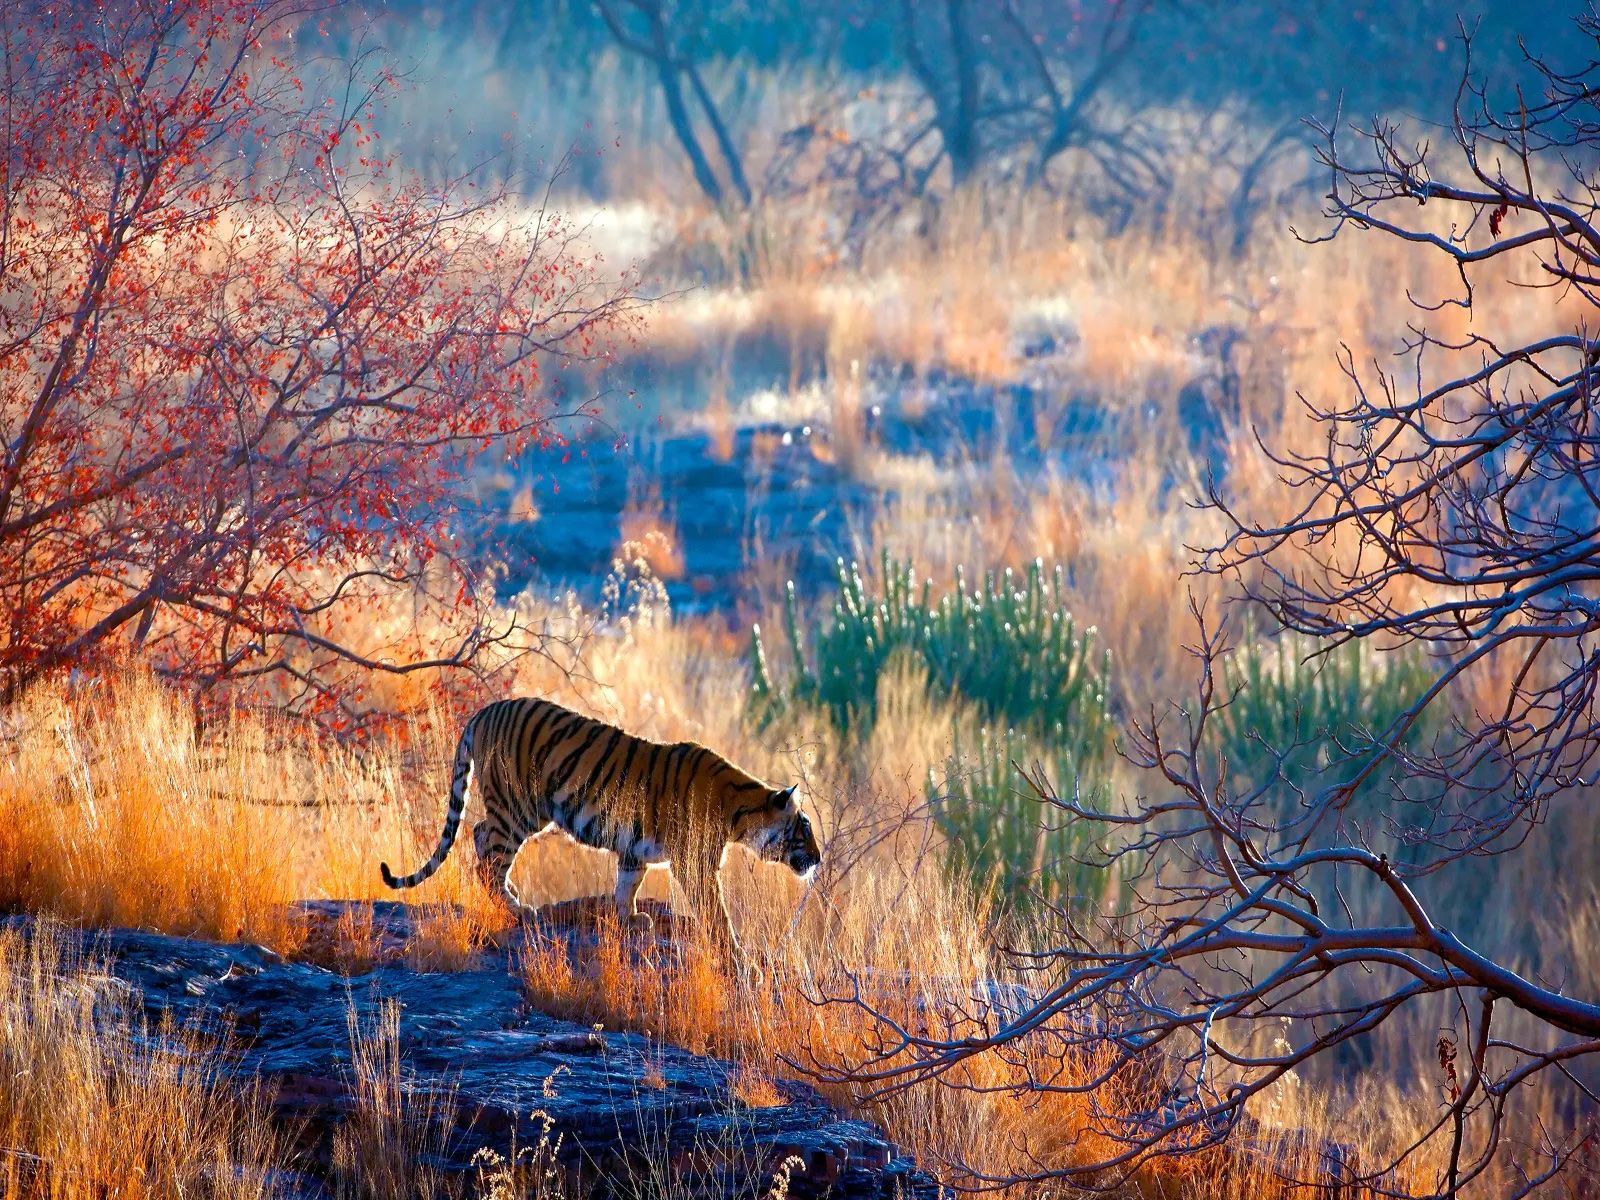 A tiger in Ranthambore National Park, Rajasthan.